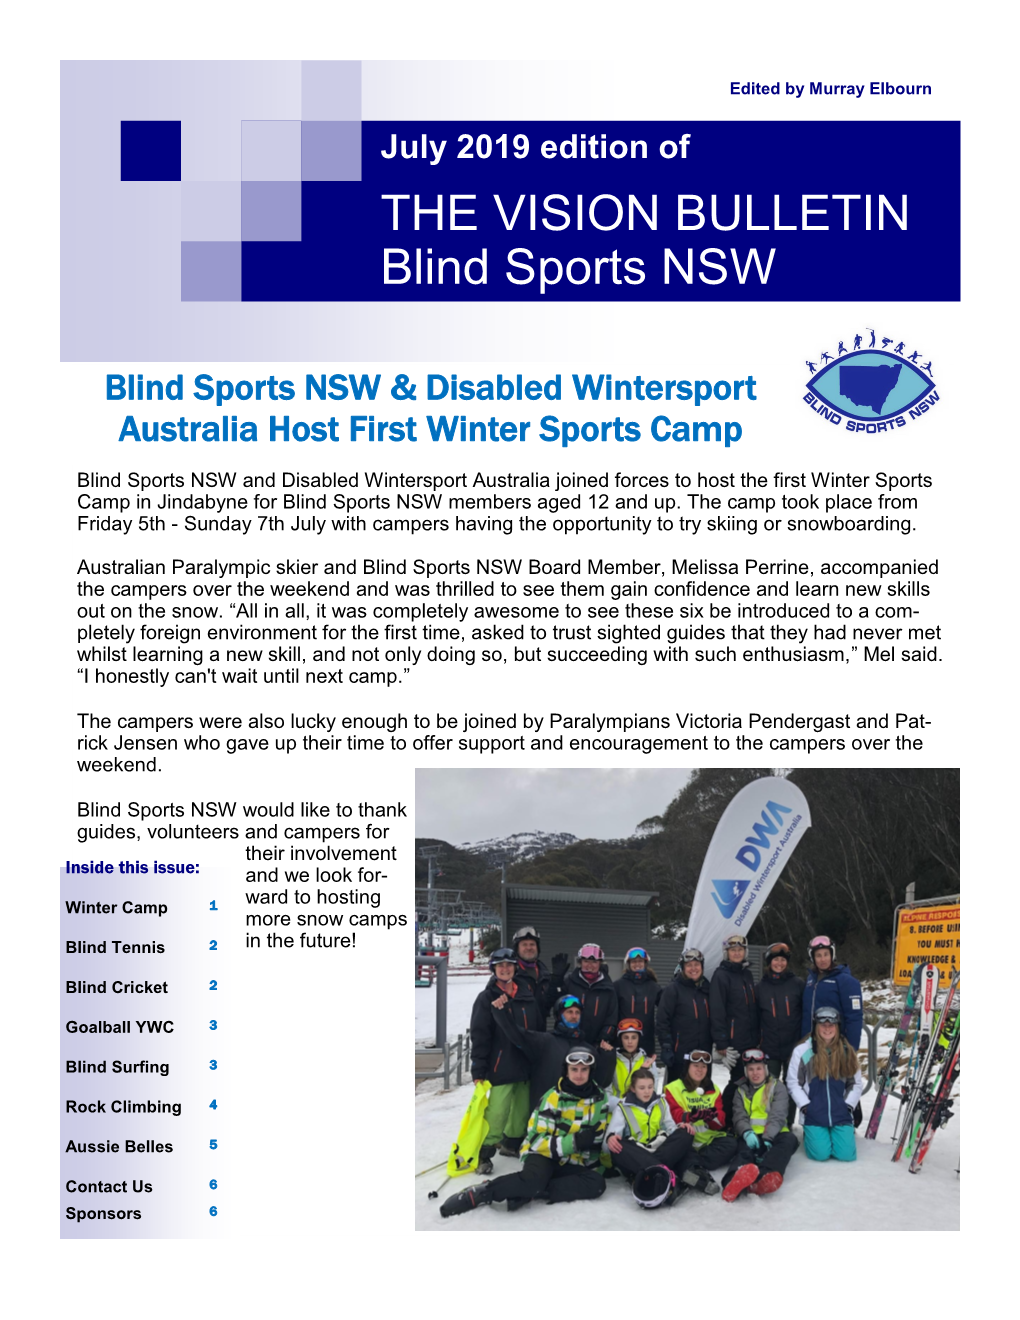 July 2019 Edition of the VISION BULLETIN Blind Sports NSW